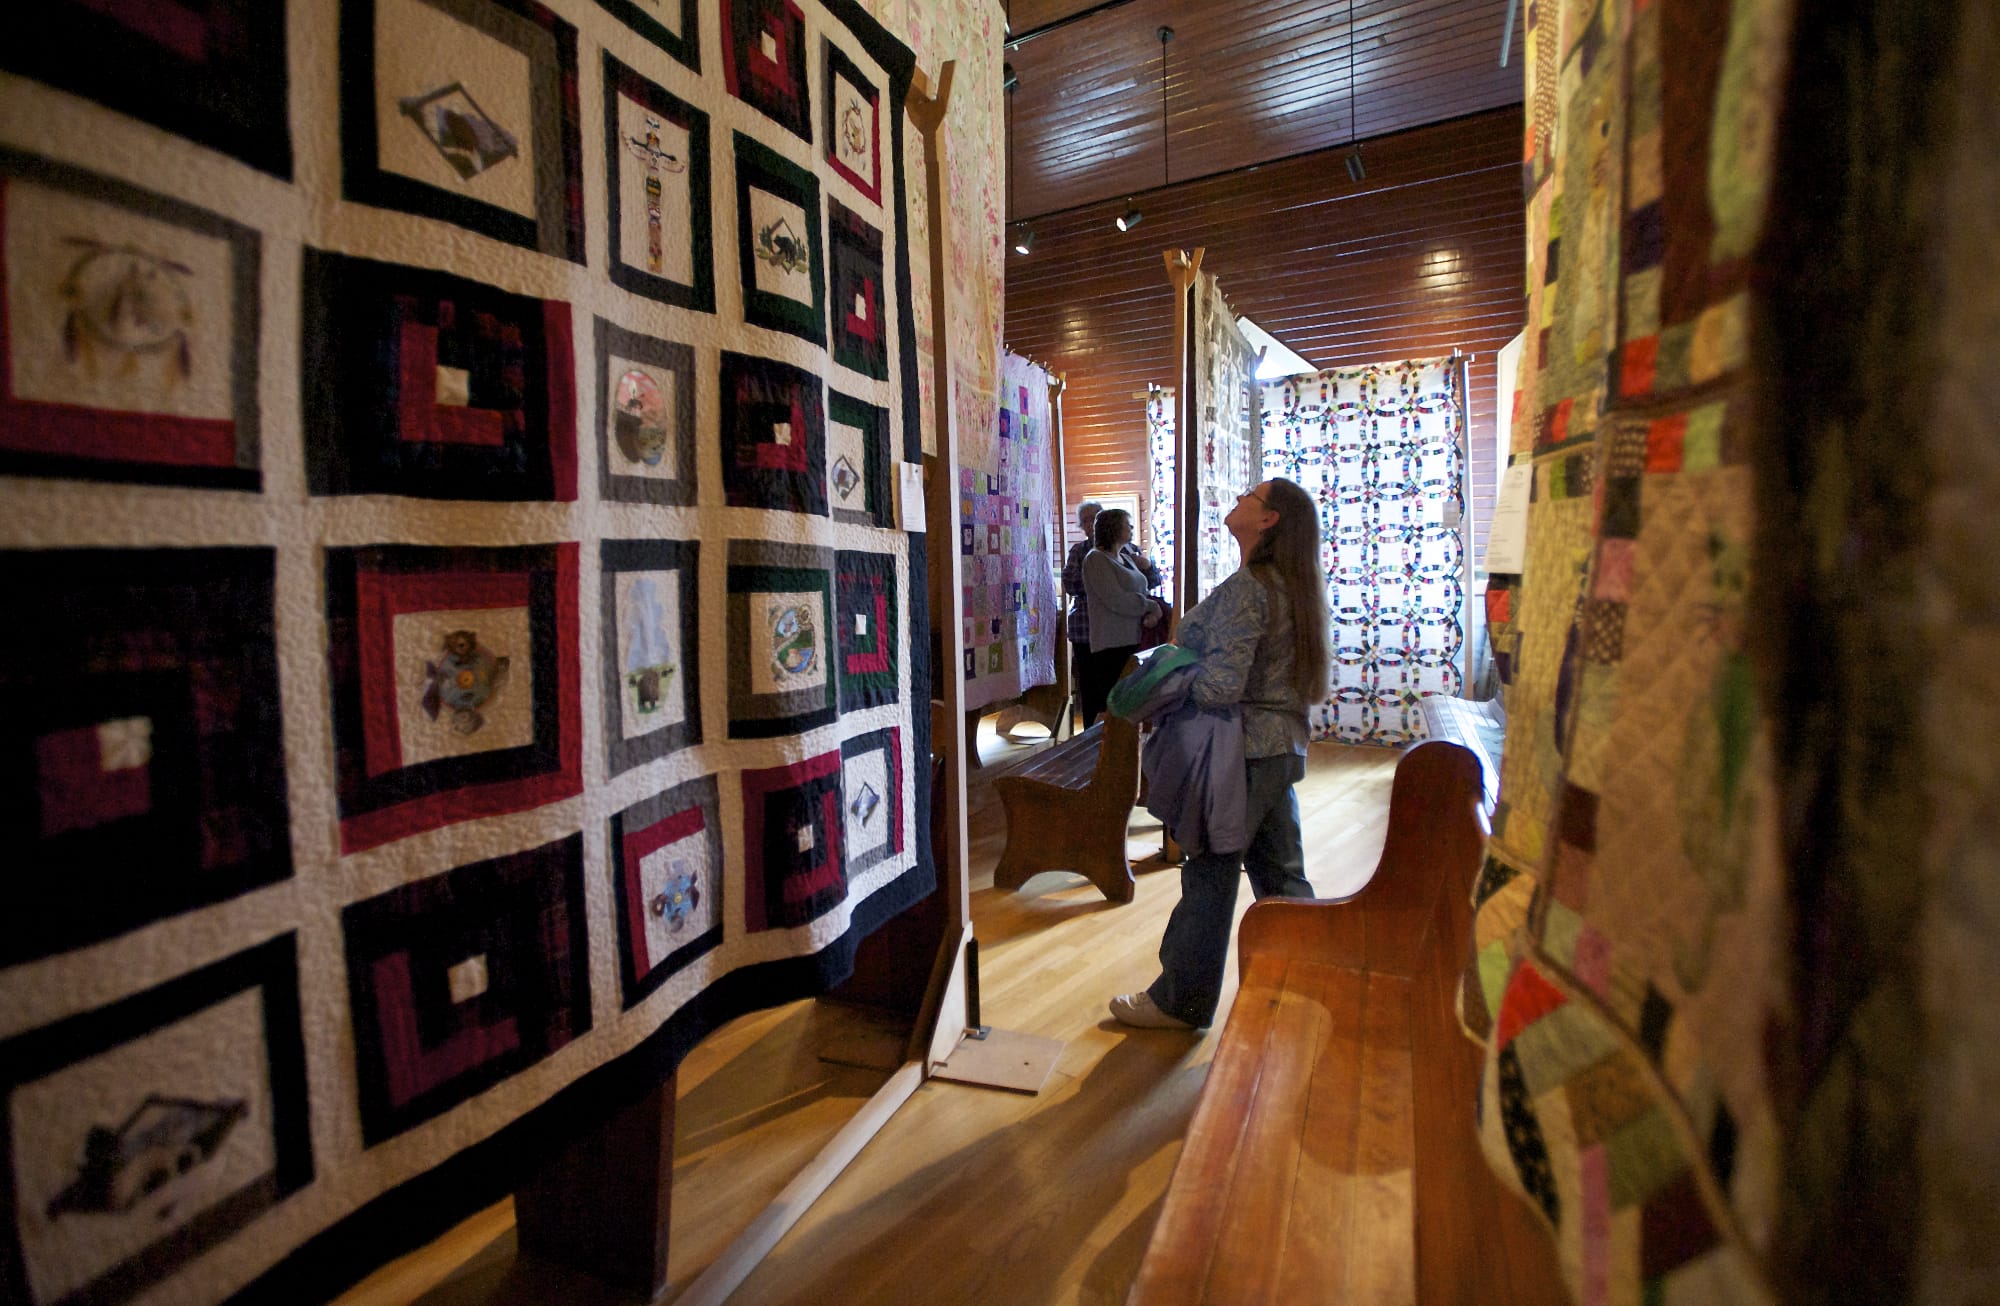 Sewer and crafter Deborah Schmitz of La Center looks up Sunday at a quilt on display at the North Clark Historical Museum in Amboy.